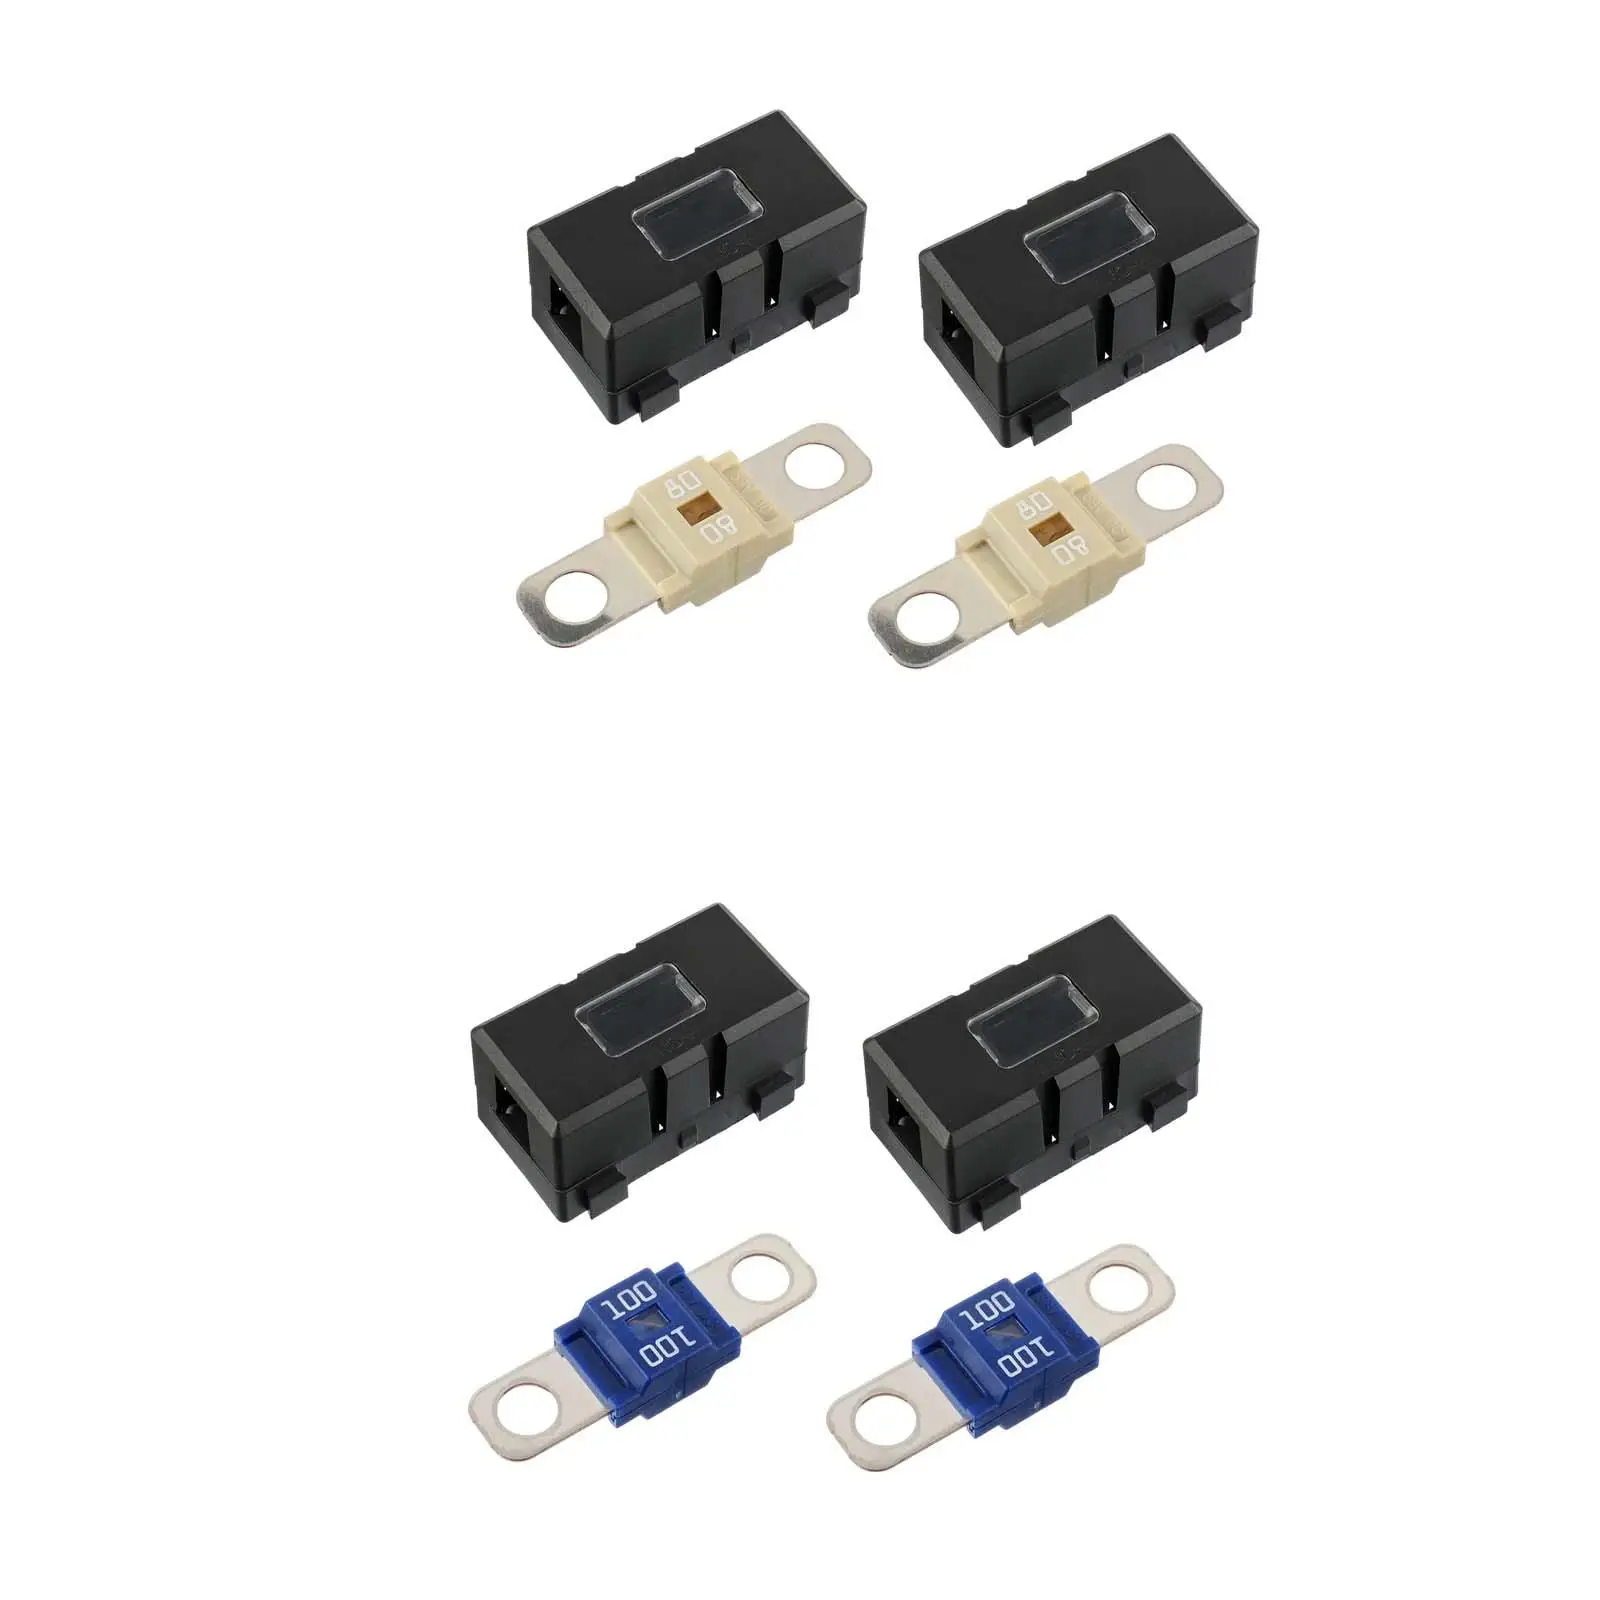 Multipurpose Car Fuse Holder Dampproof Waterproof High Temperature Resistant ans Fuse block for Trucks Vehicles Cars